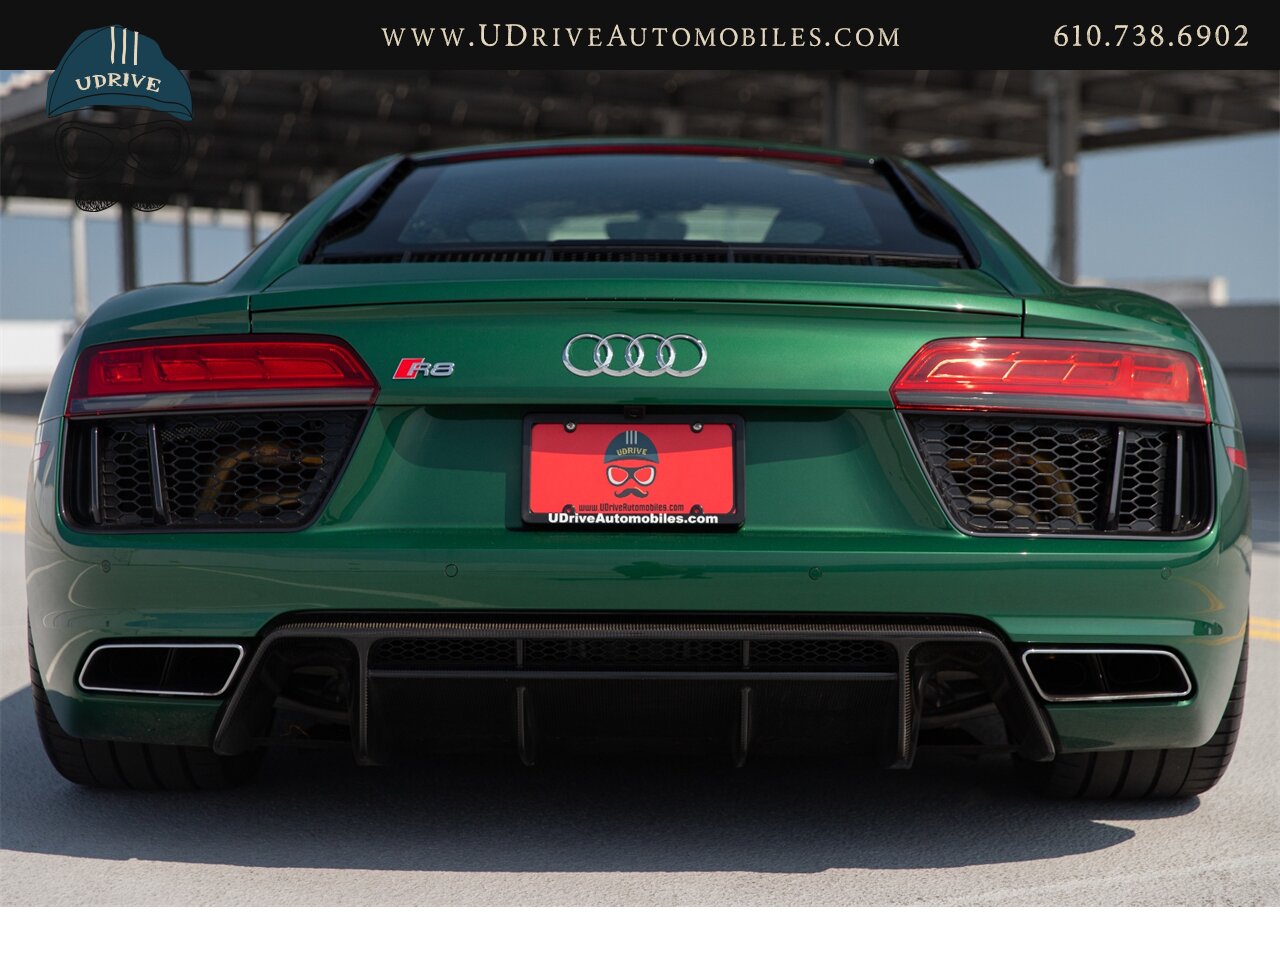 2017 Audi R8 Audi Exclusive Avocado Green Vermont Brown Leather  Diamond Stitching V10 Carbon Fiber - Photo 24 - West Chester, PA 19382